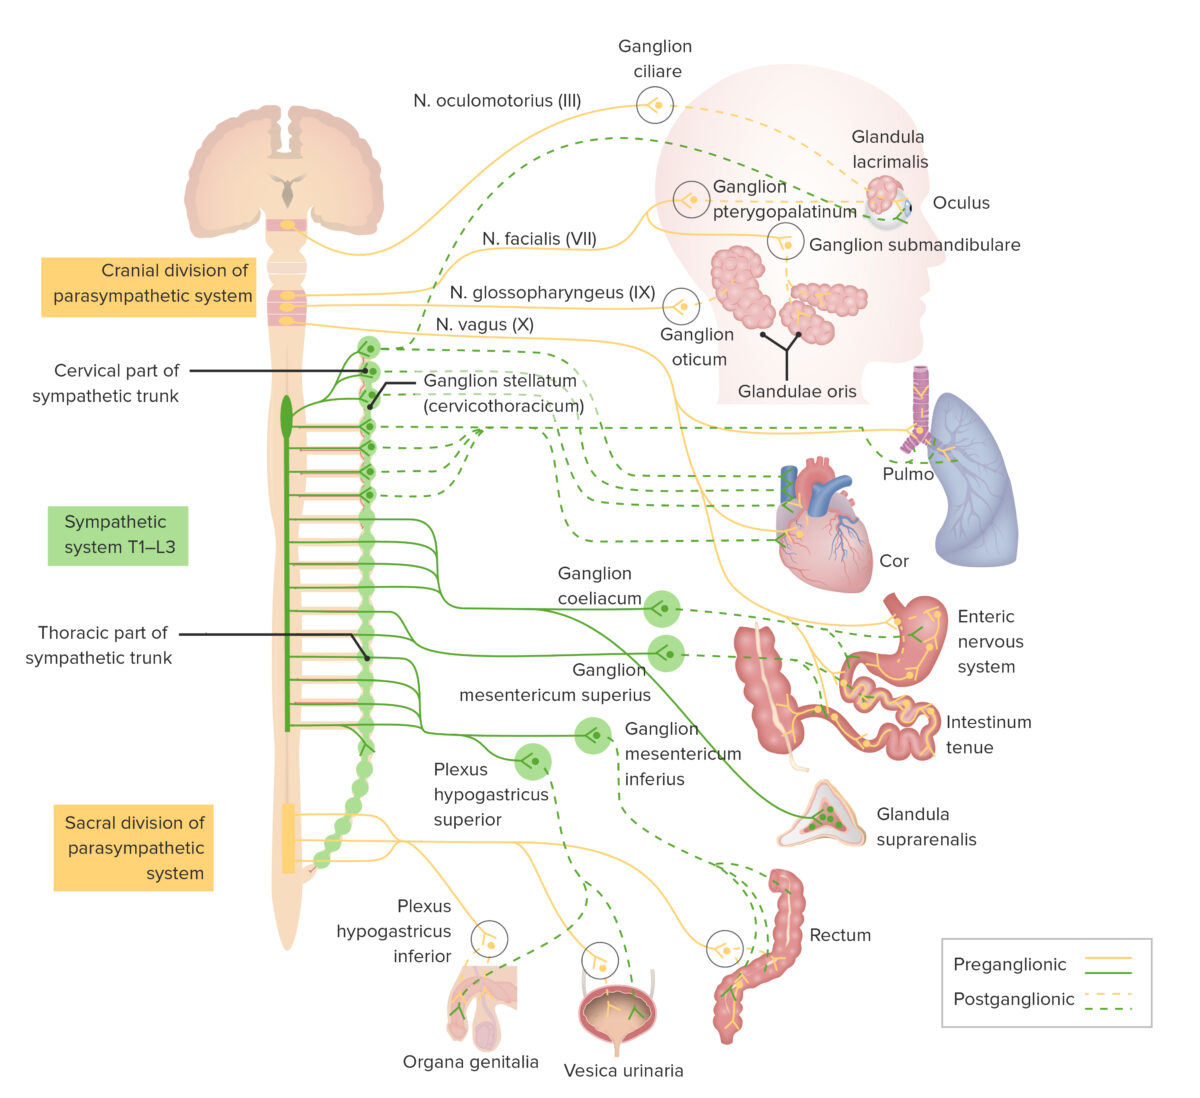 Pathways of the sympathetic nervous system